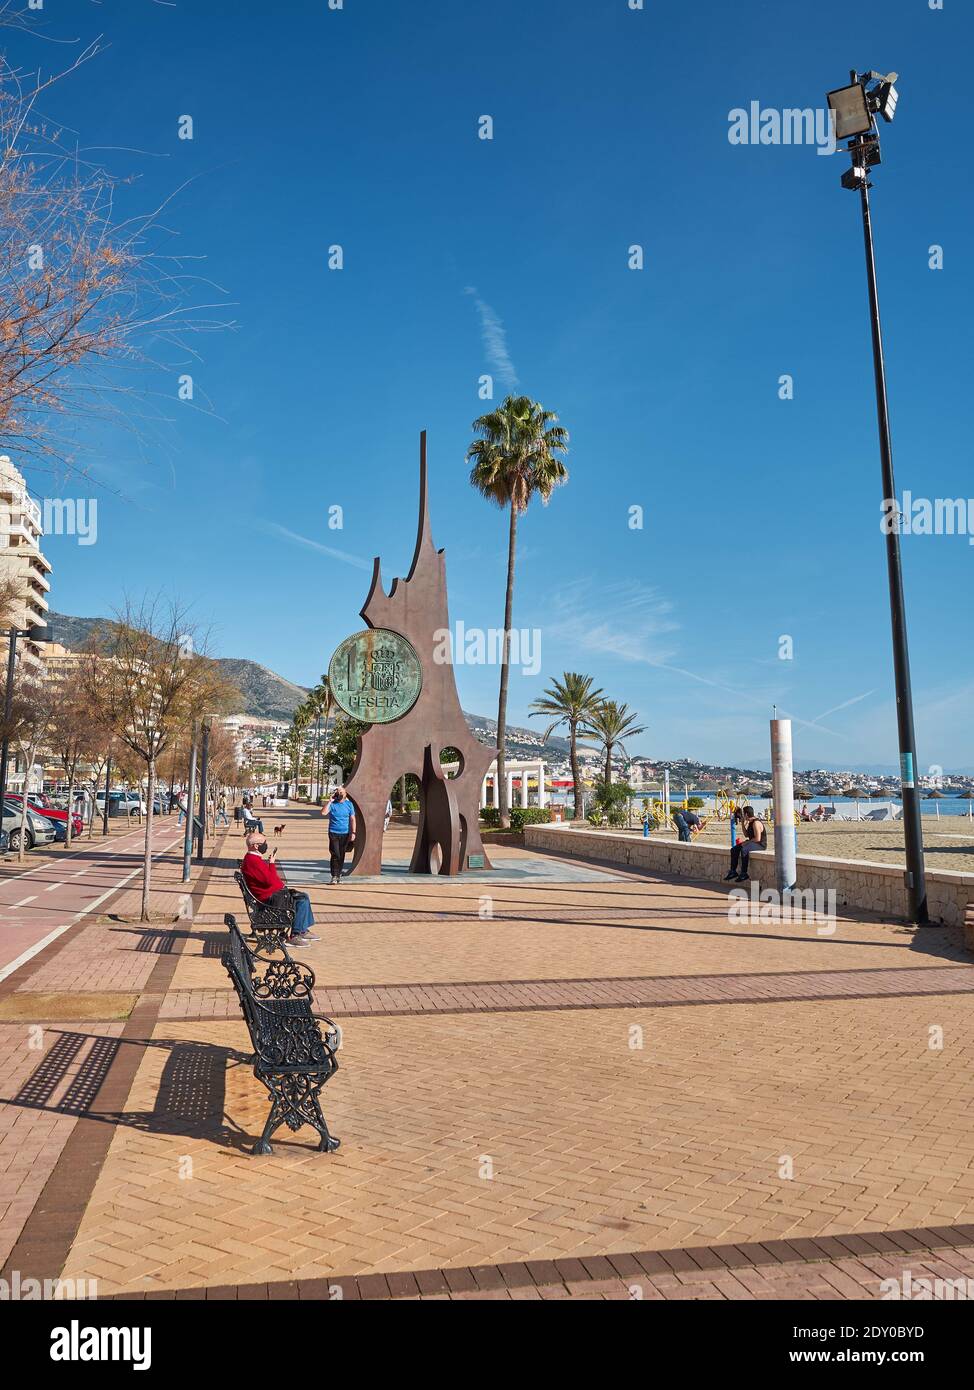 Monument to the Peseta, wich was replaced in 2002 by the Euro. Los Boliches, Fuengirola, Malaga province, Andalusia, Spain. Stock Photo